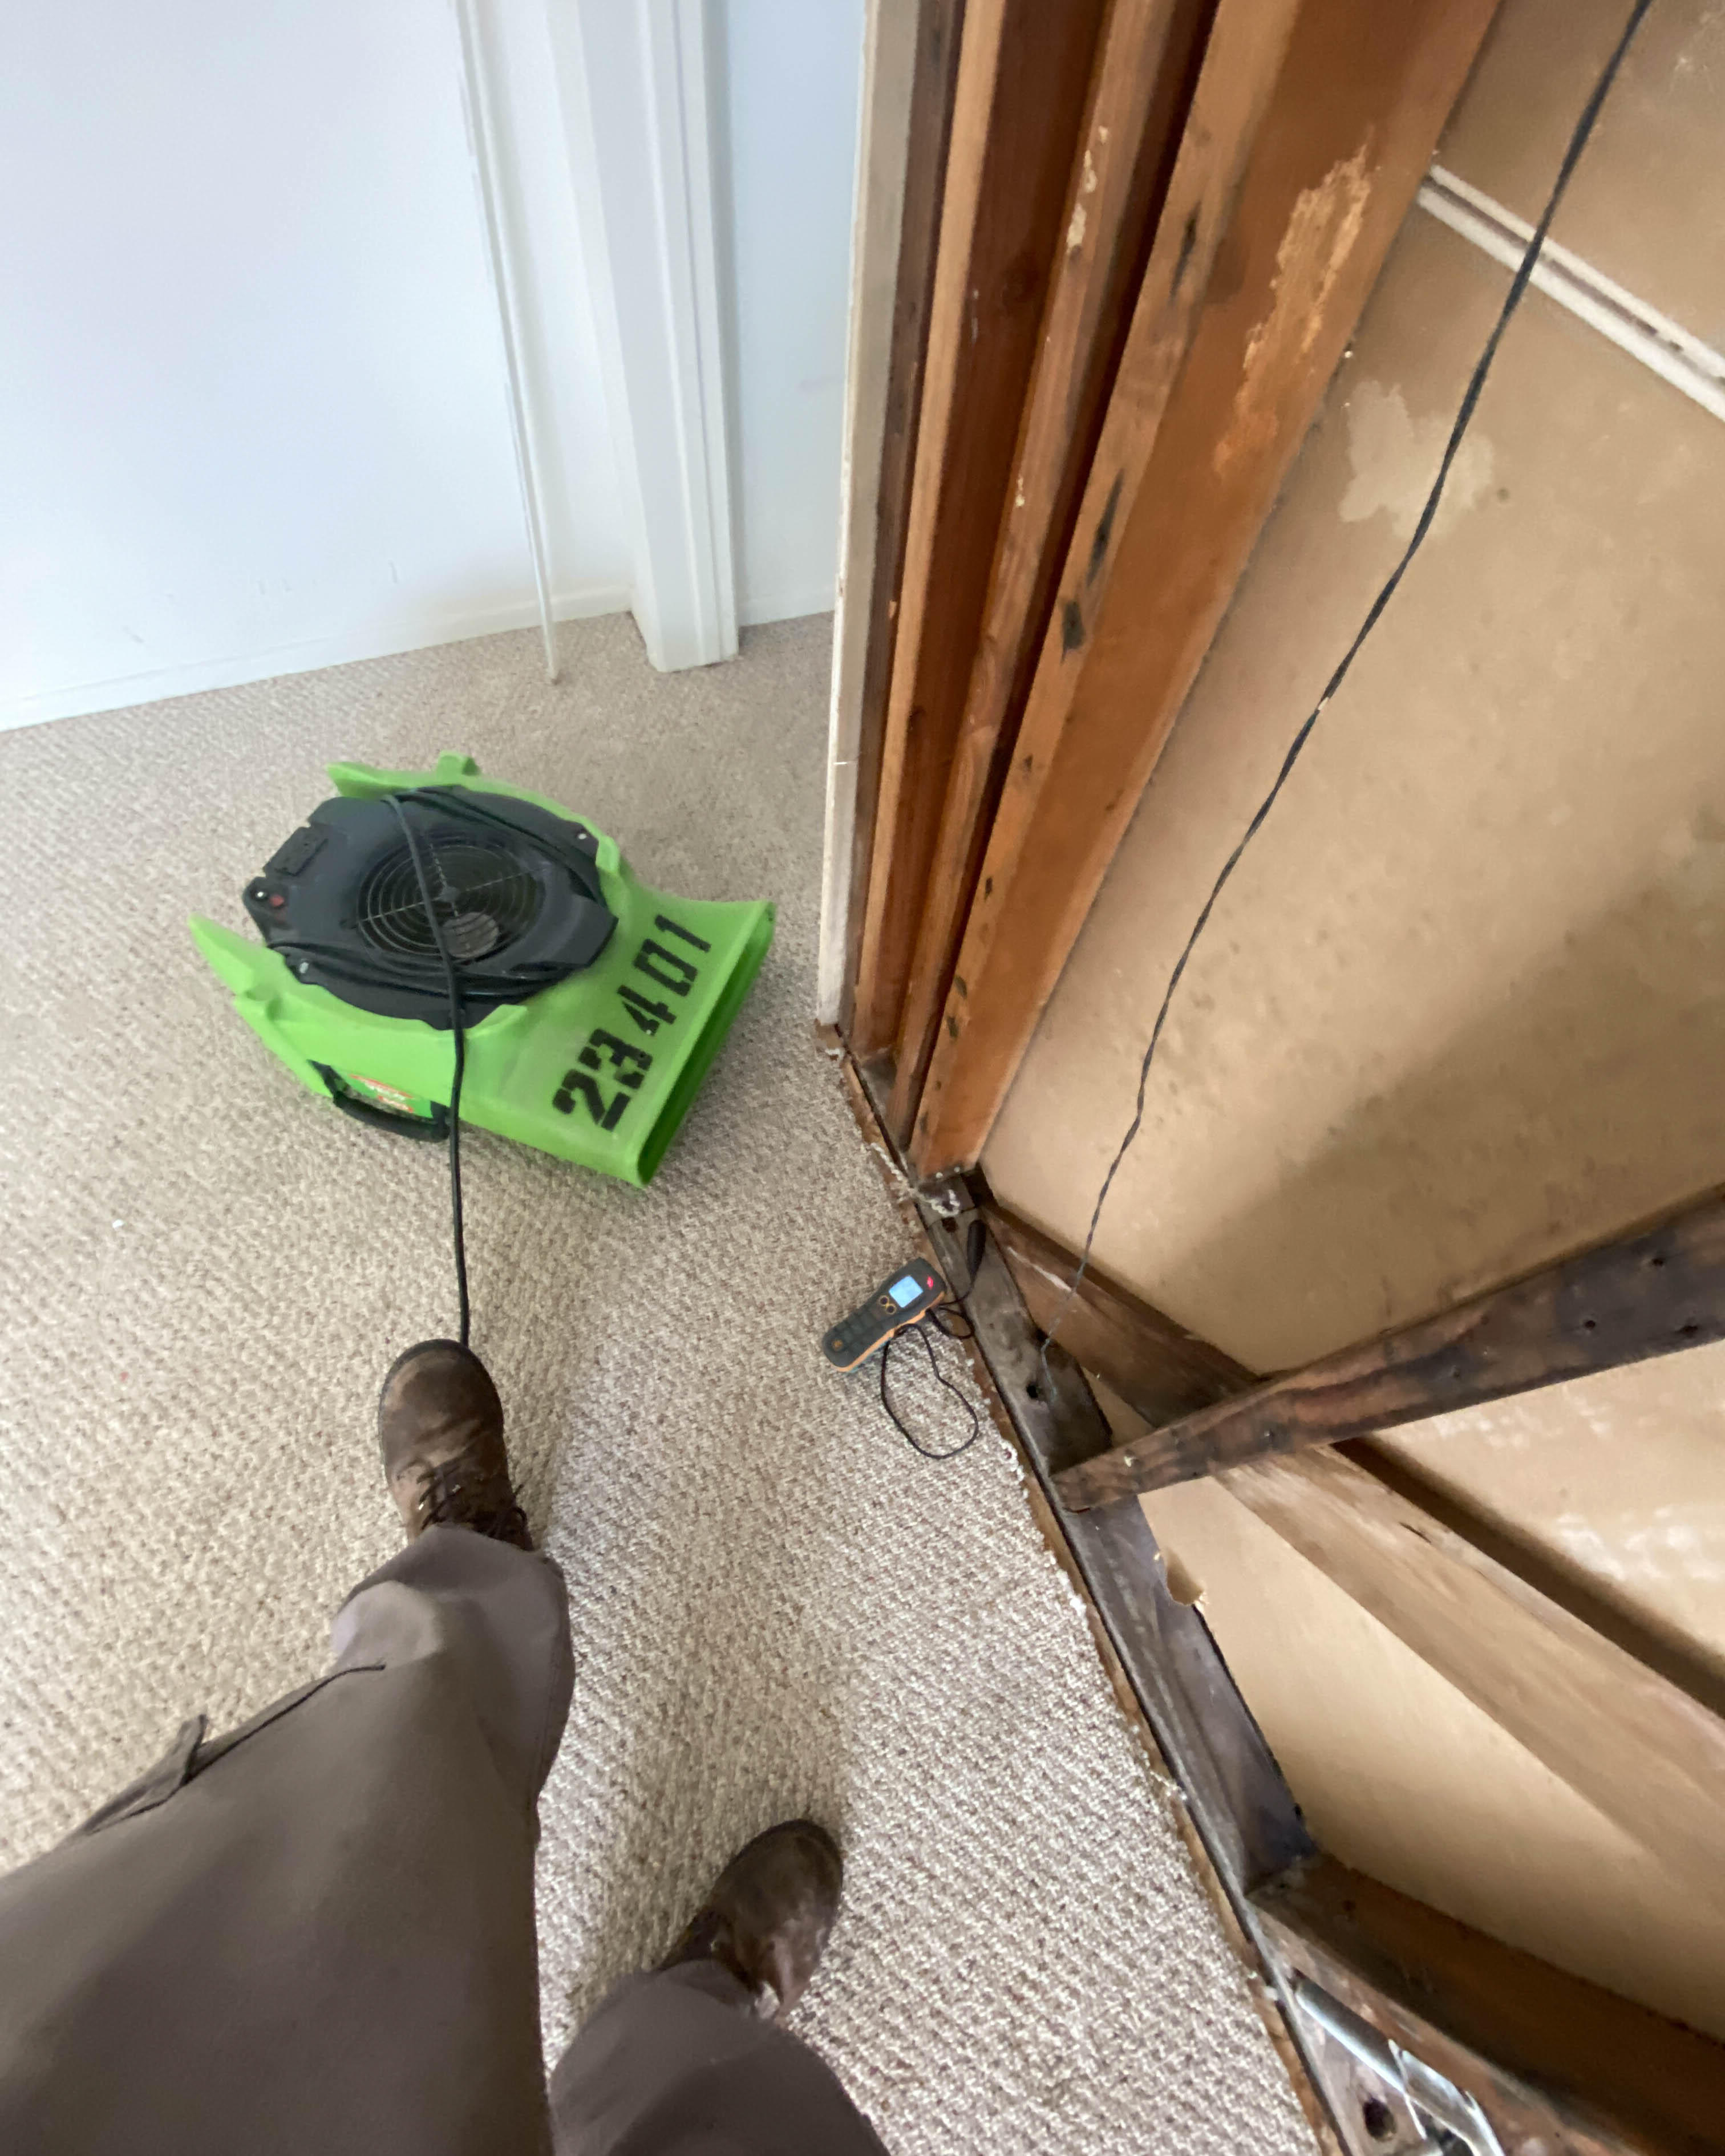 Is your property in Lantern Village, CA showing indications of water damage? Give SERVPRO of Laguna Beach/ Dana Point a call , we'll take care of the rest!